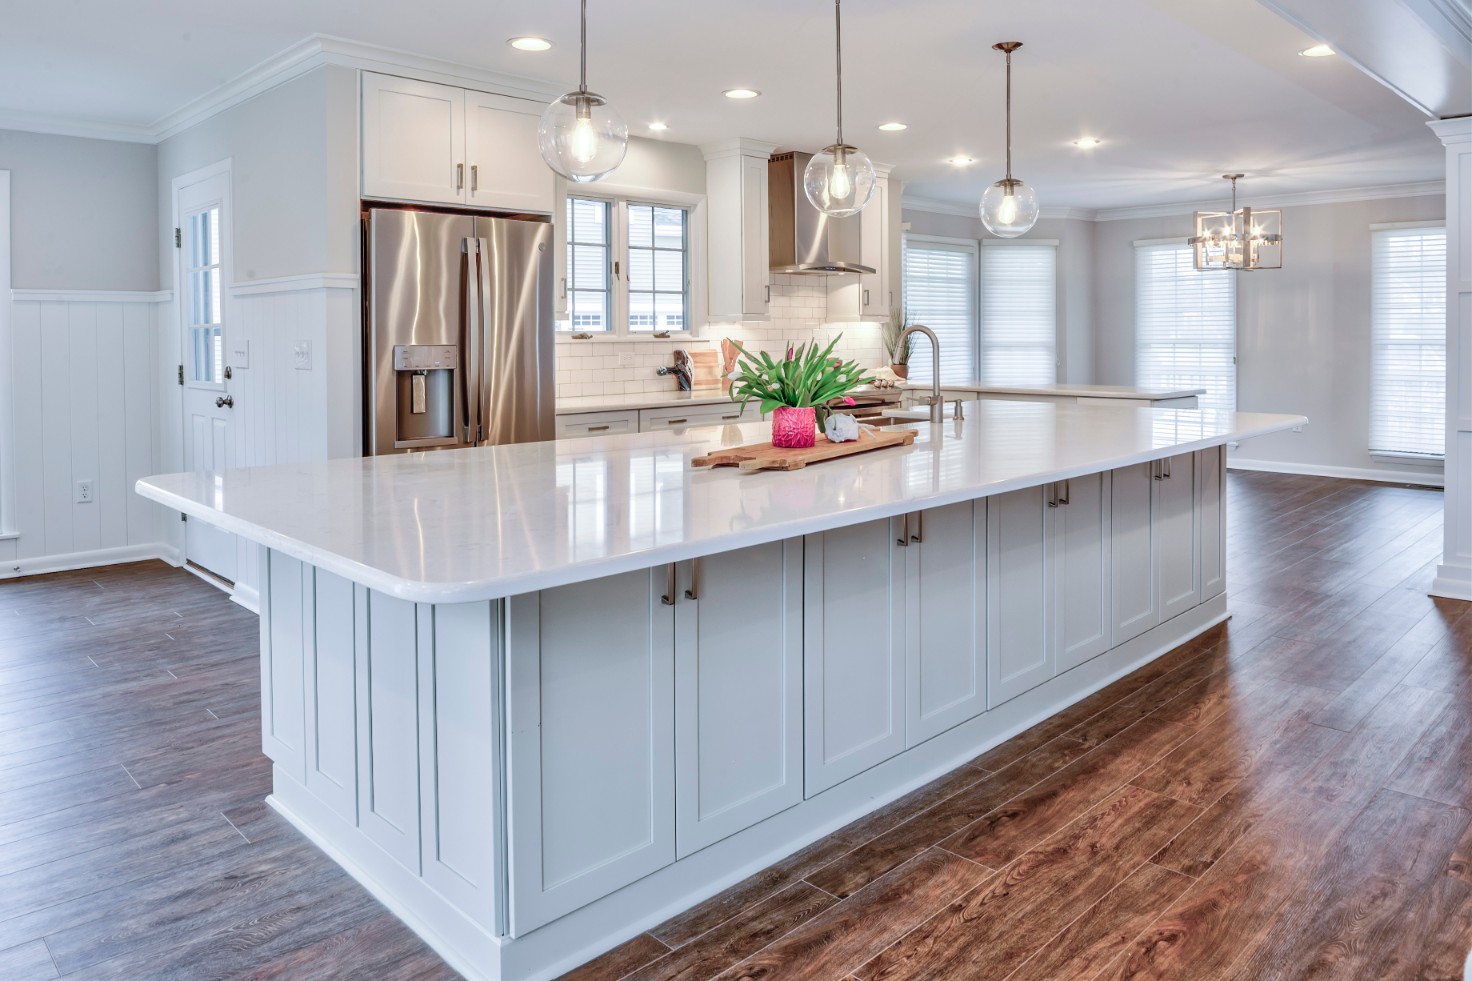 Canal Way Renovation in Bethany Beach DE - Kitchen with Large Center Island